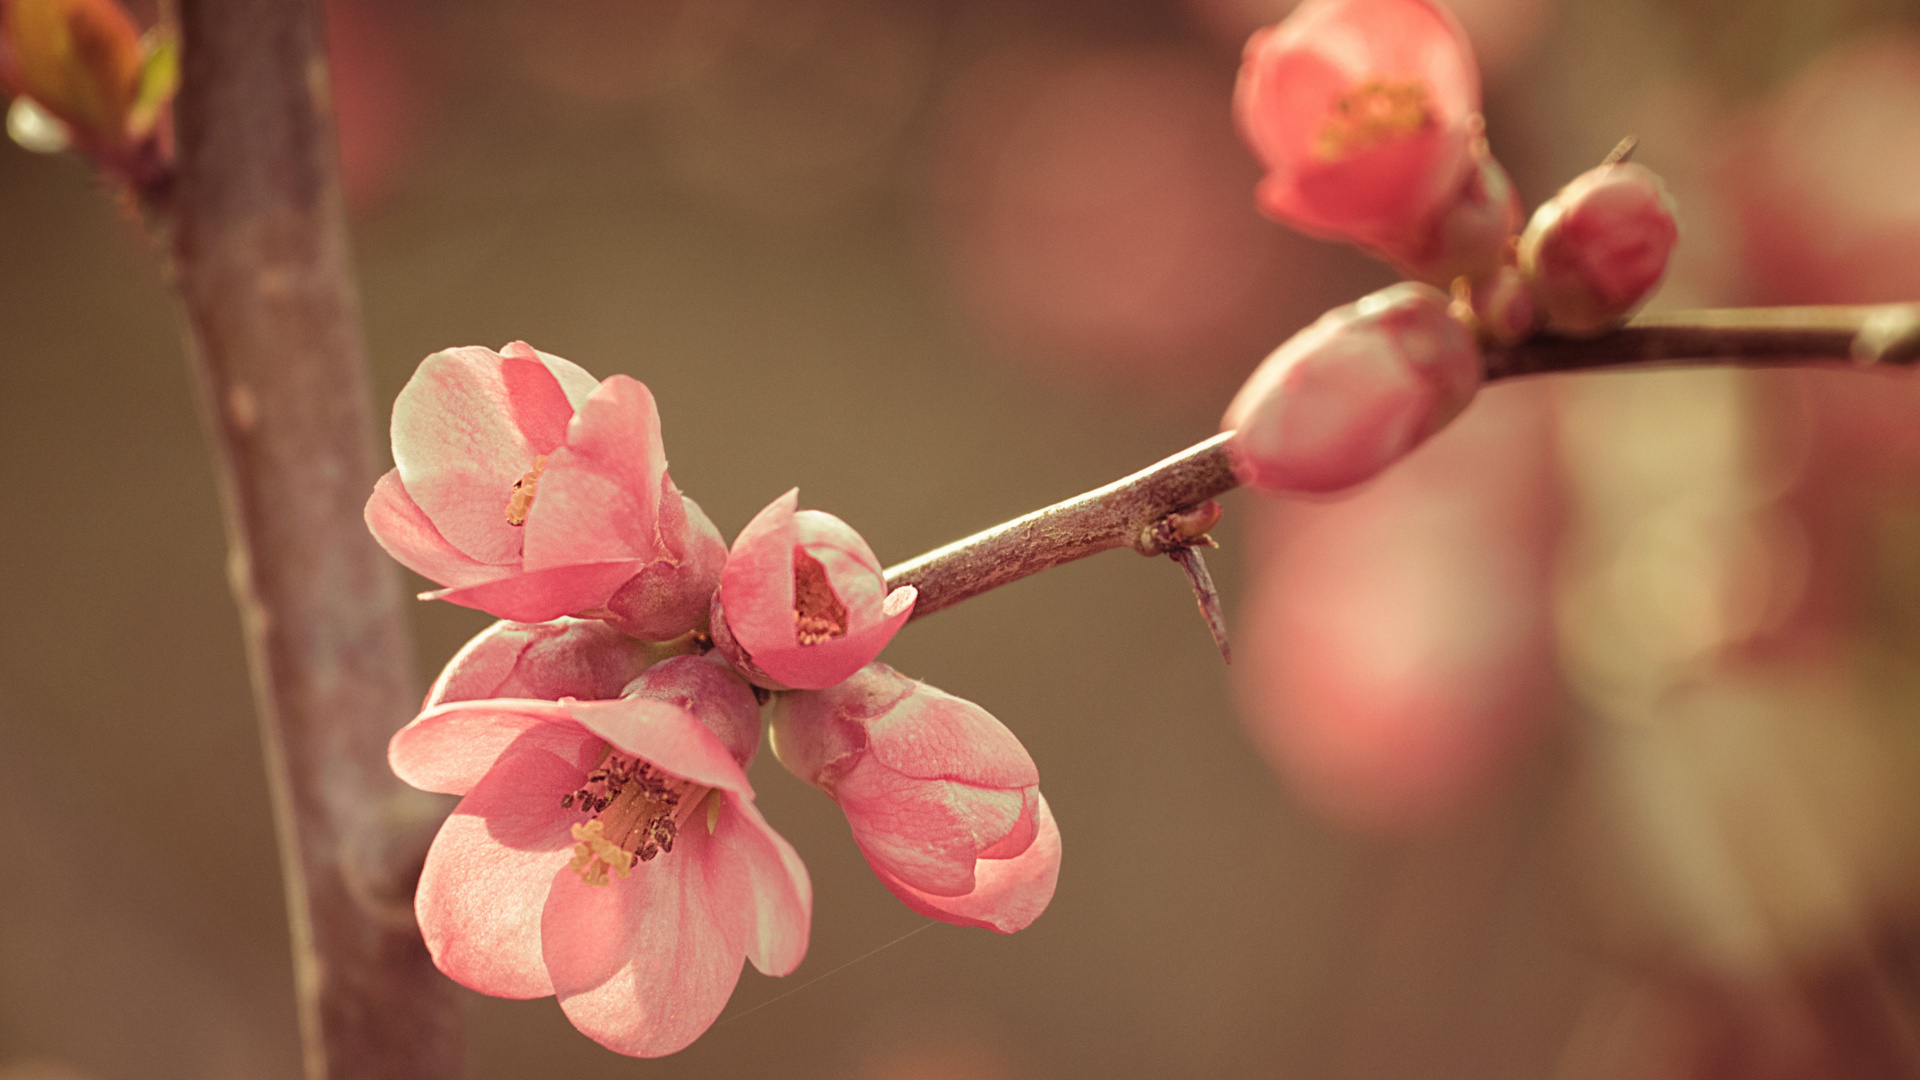 Pink Cherry Blossom in Close up Photography. Wallpaper in 1920x1080 Resolution